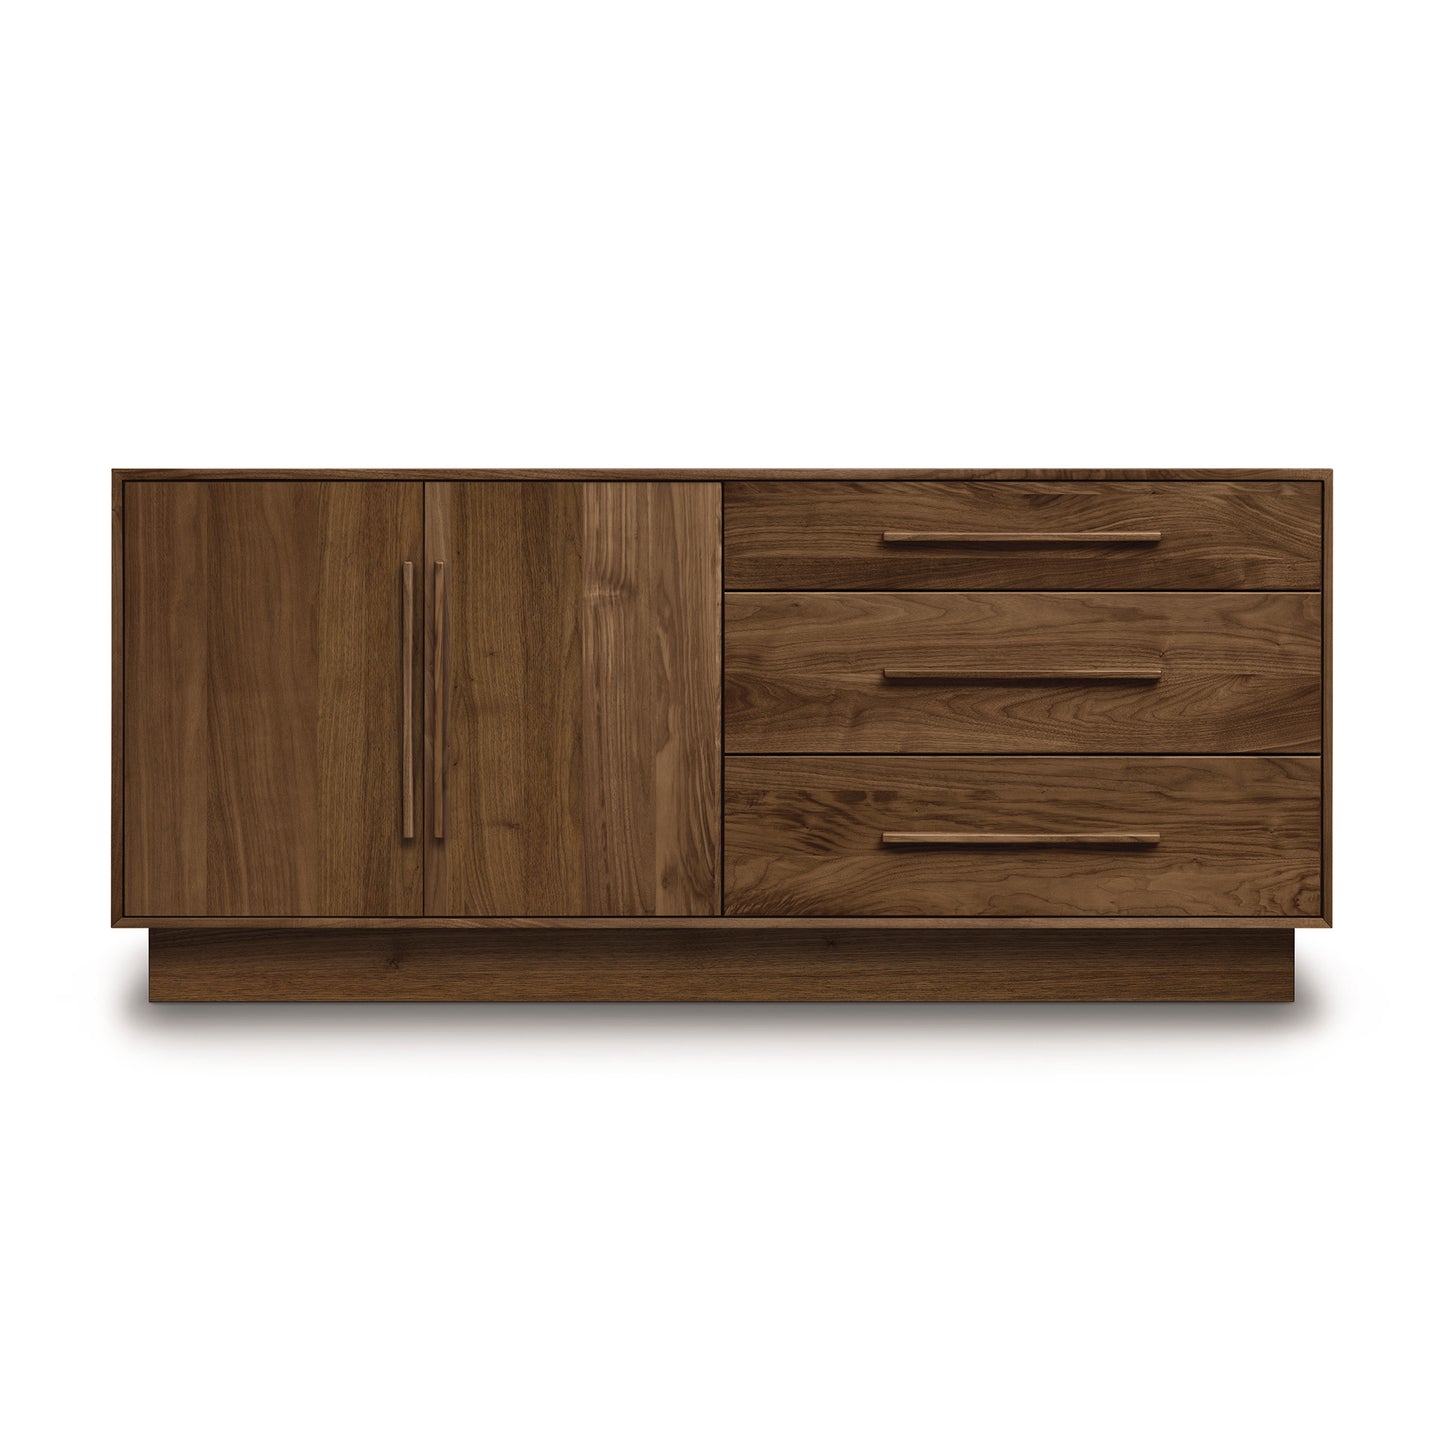 A Copeland Furniture Moduluxe 3-Drawer, 2-Door Dresser - 29" Series with two drawers and two doors.